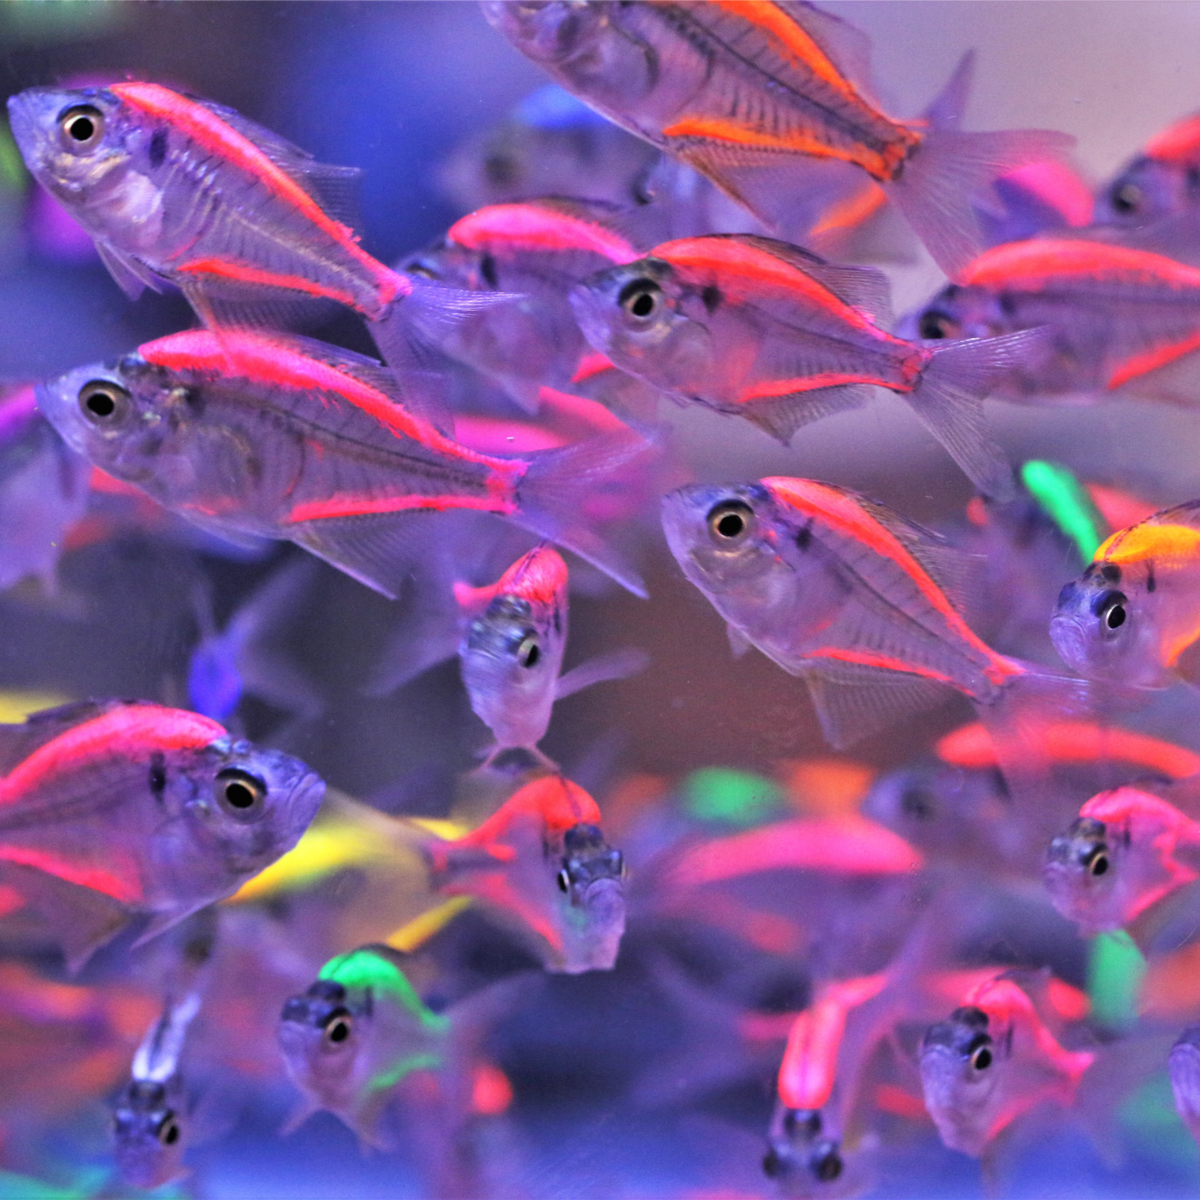 Are painted or dyed fish illegal in the UK?